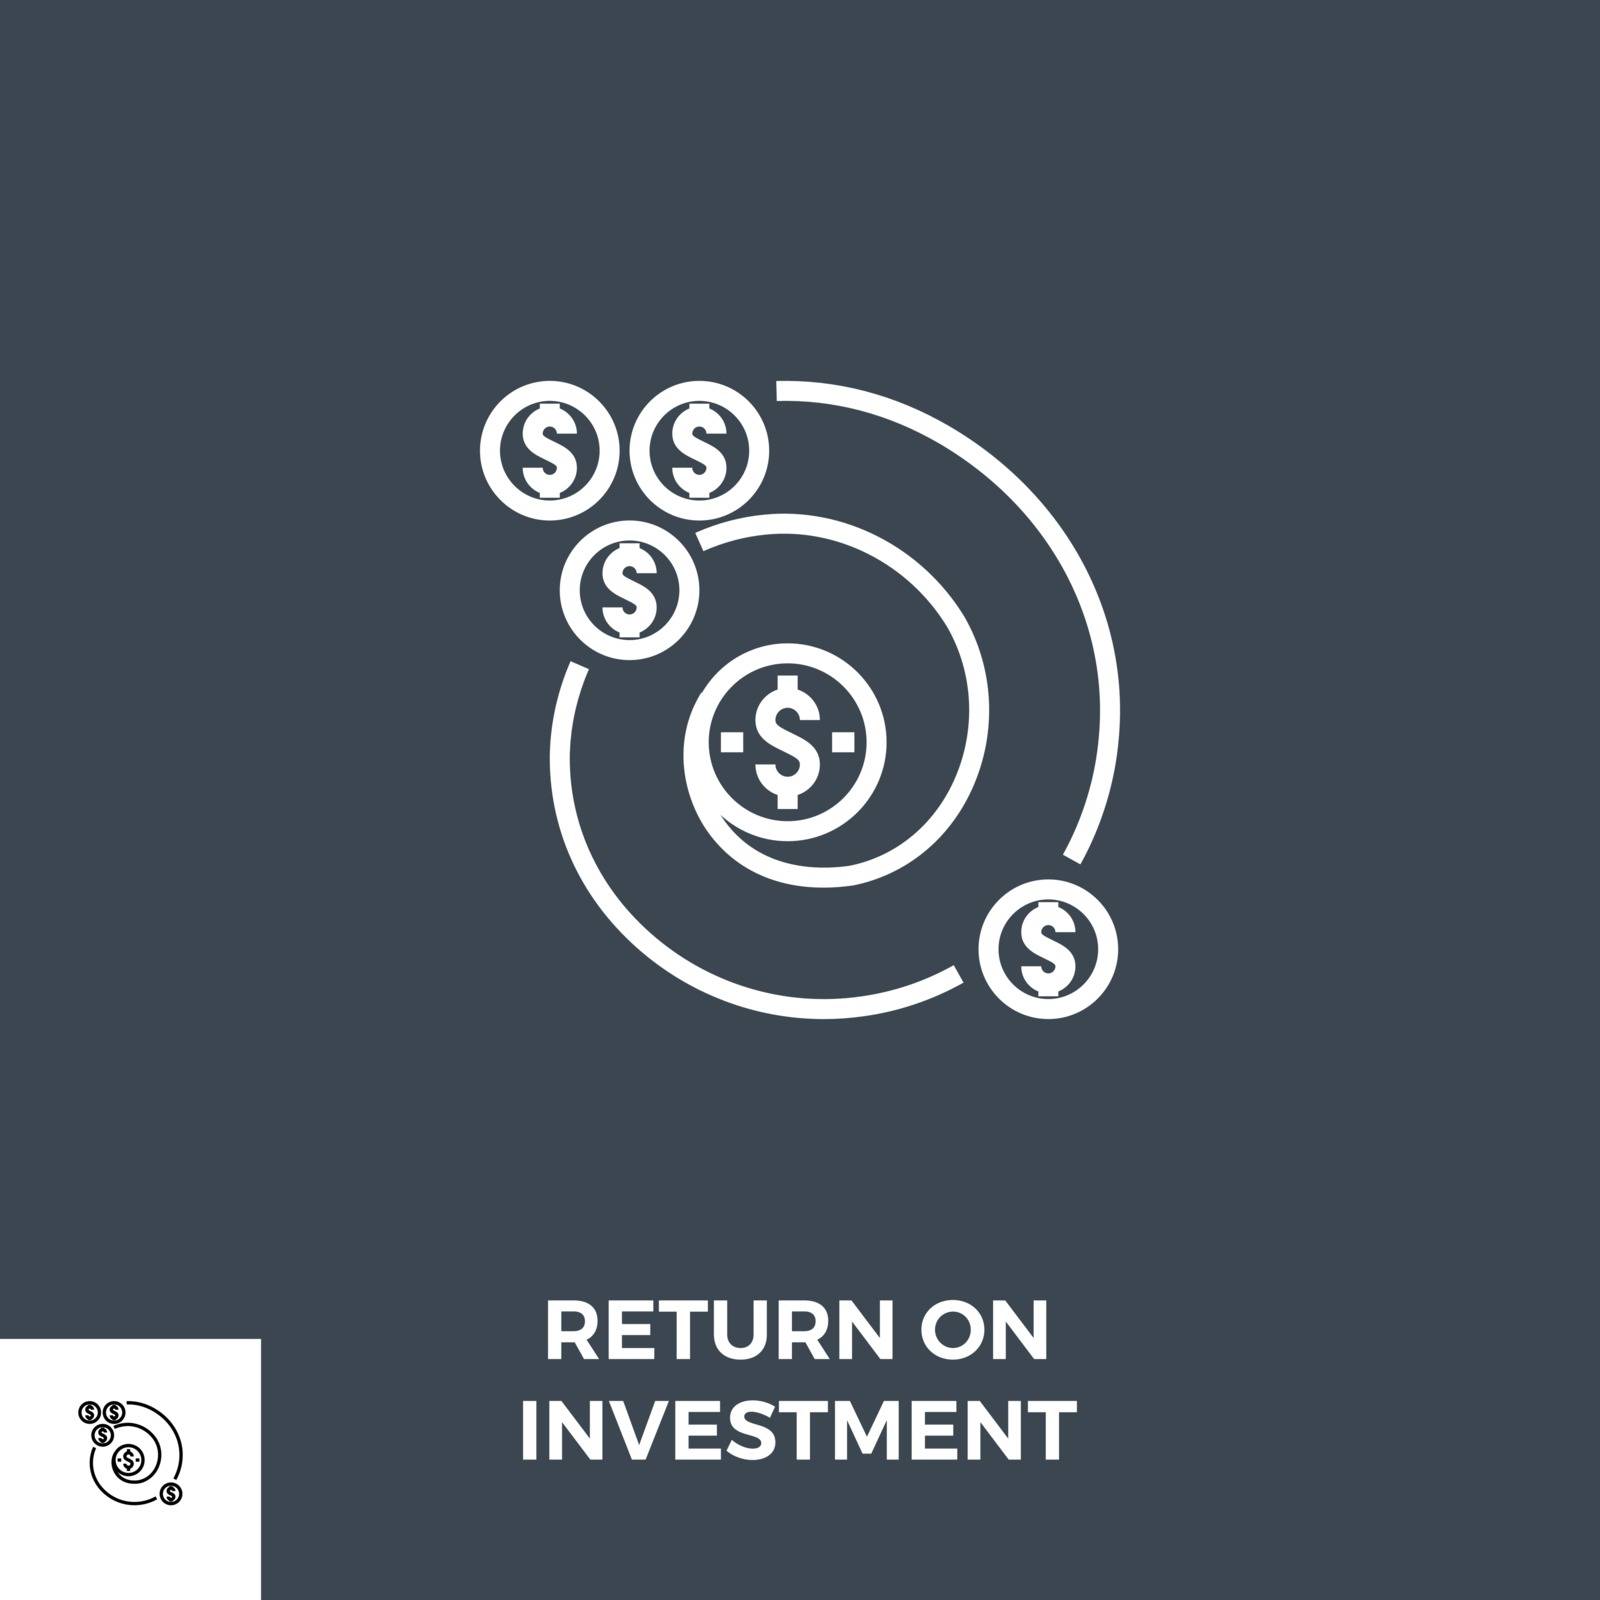 Return on Investment Related Vector Thin Line Icon. Isolated on Black Background. Editable Stroke. Vector Illustration.